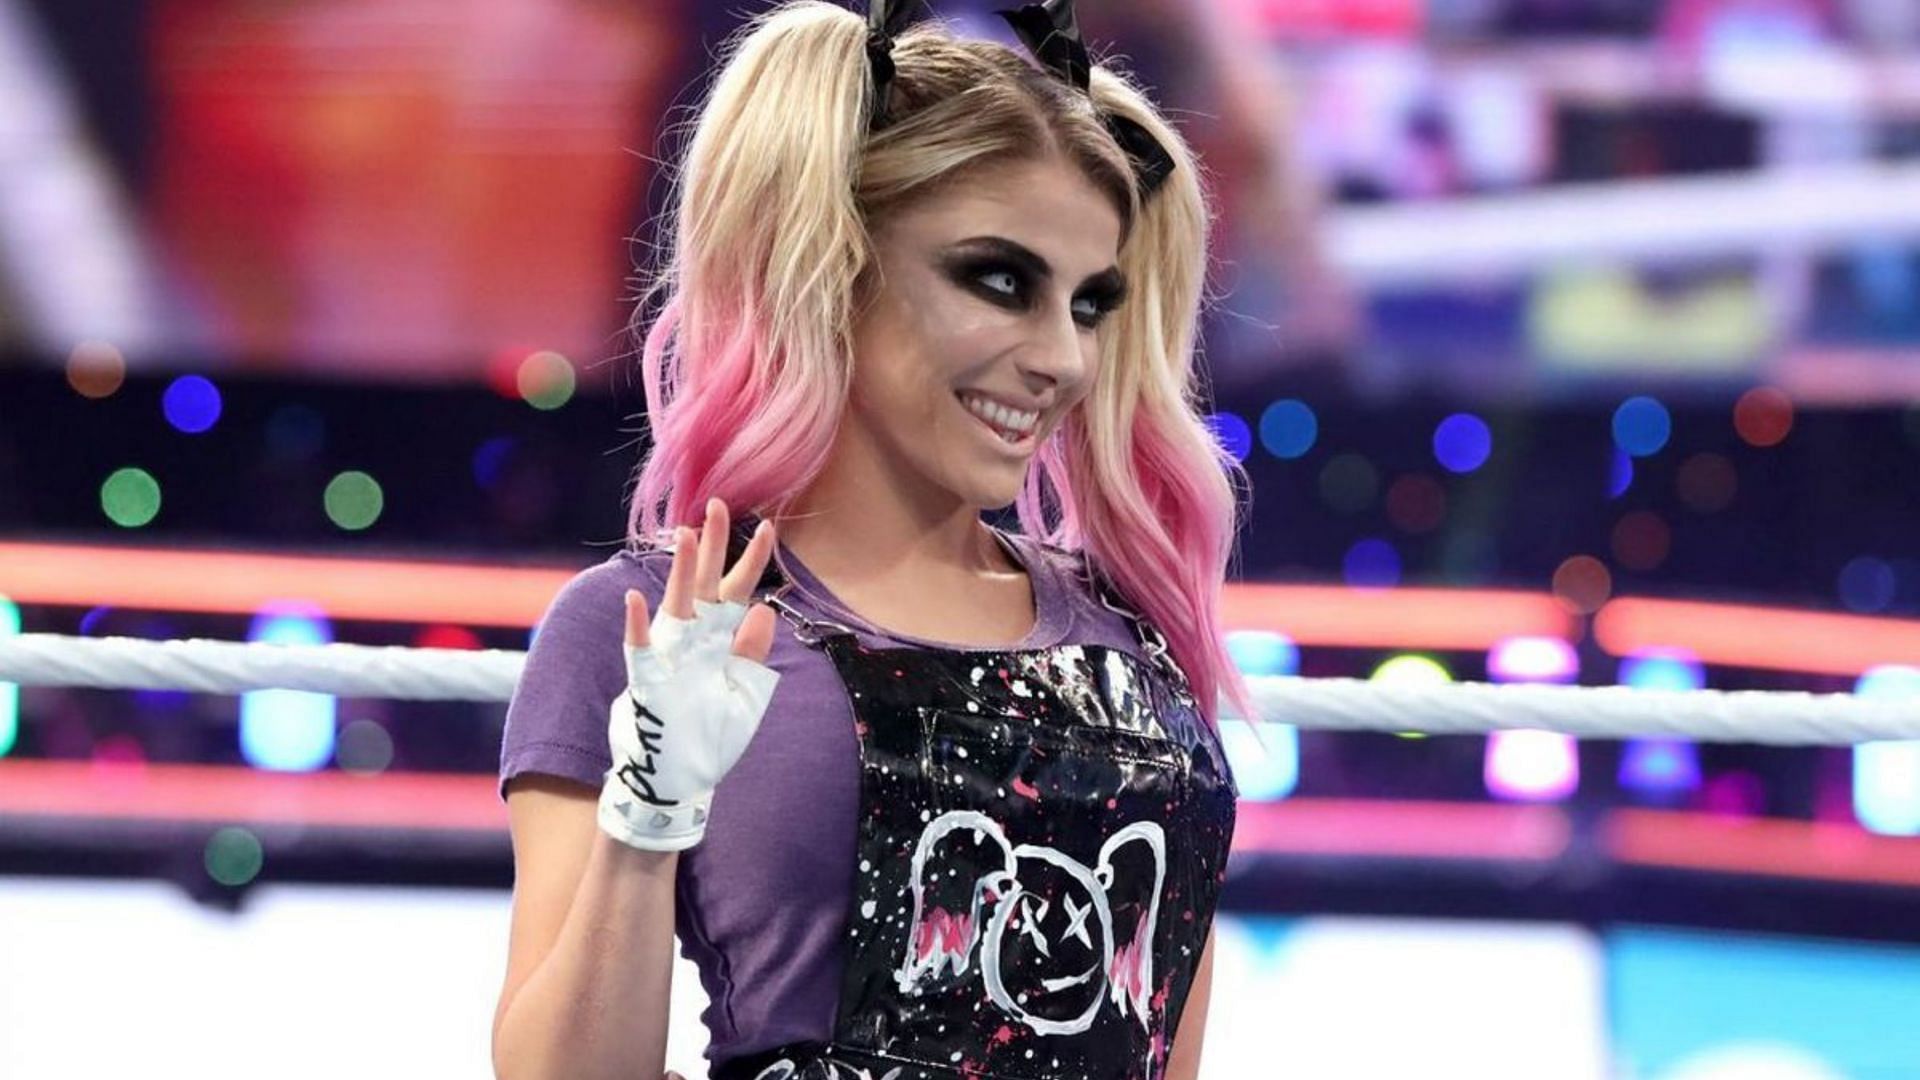 Alexa Bliss is currently on the Monday Night RAW roster